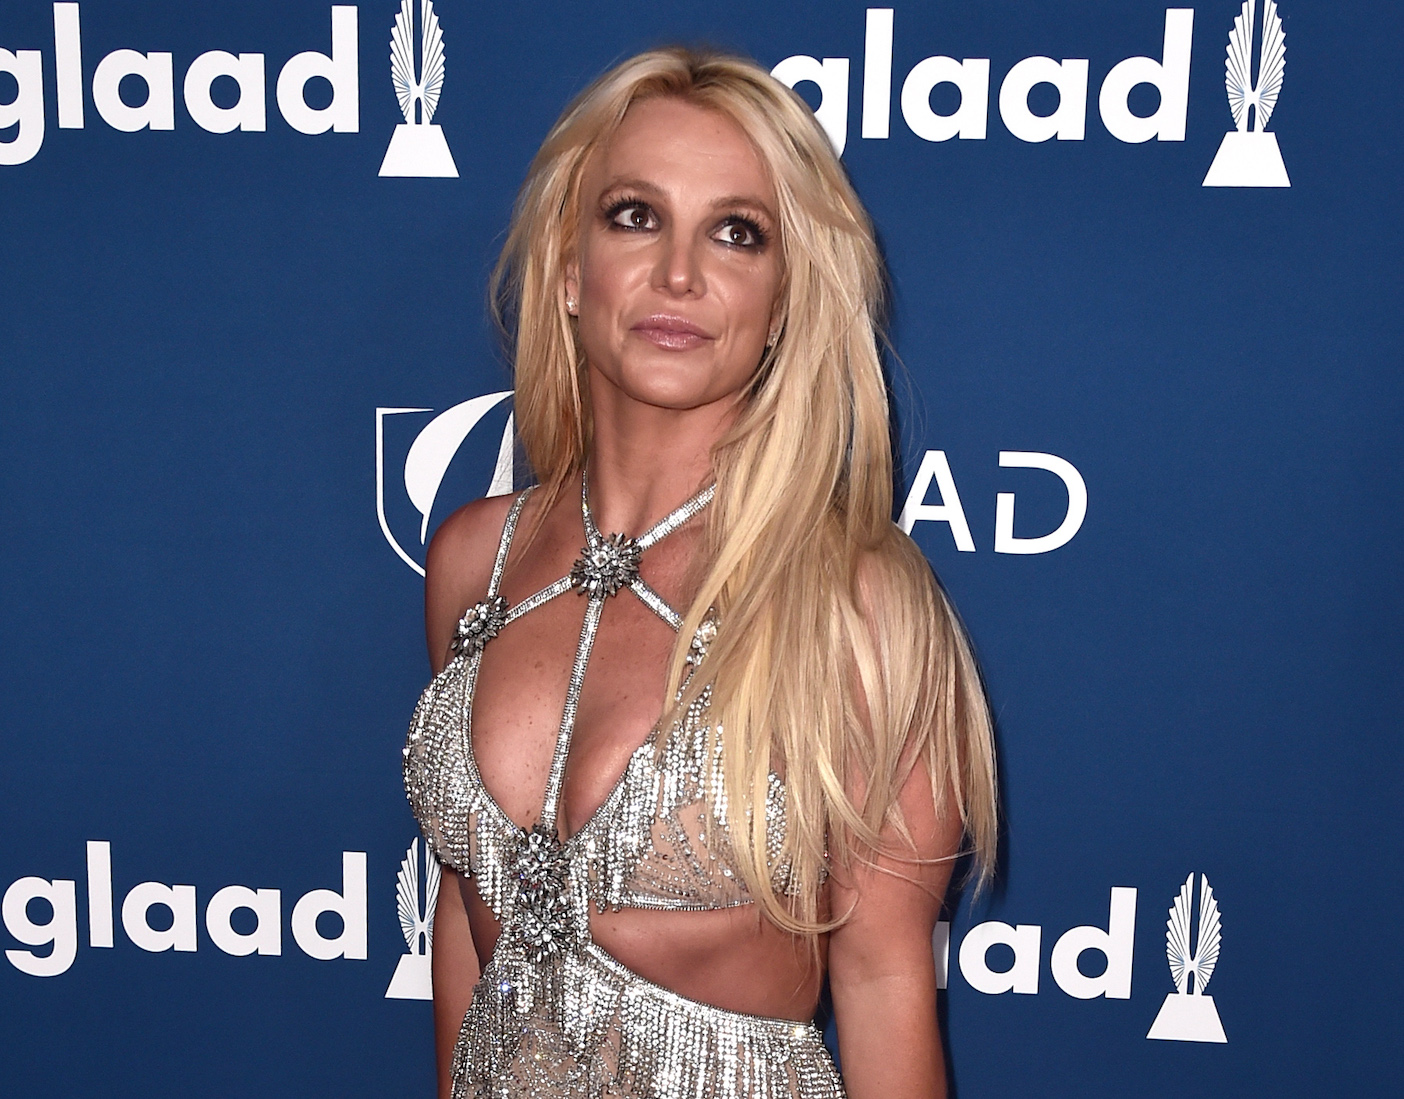 According to sketchy rumors, Britney Spears may be facing divorce already.